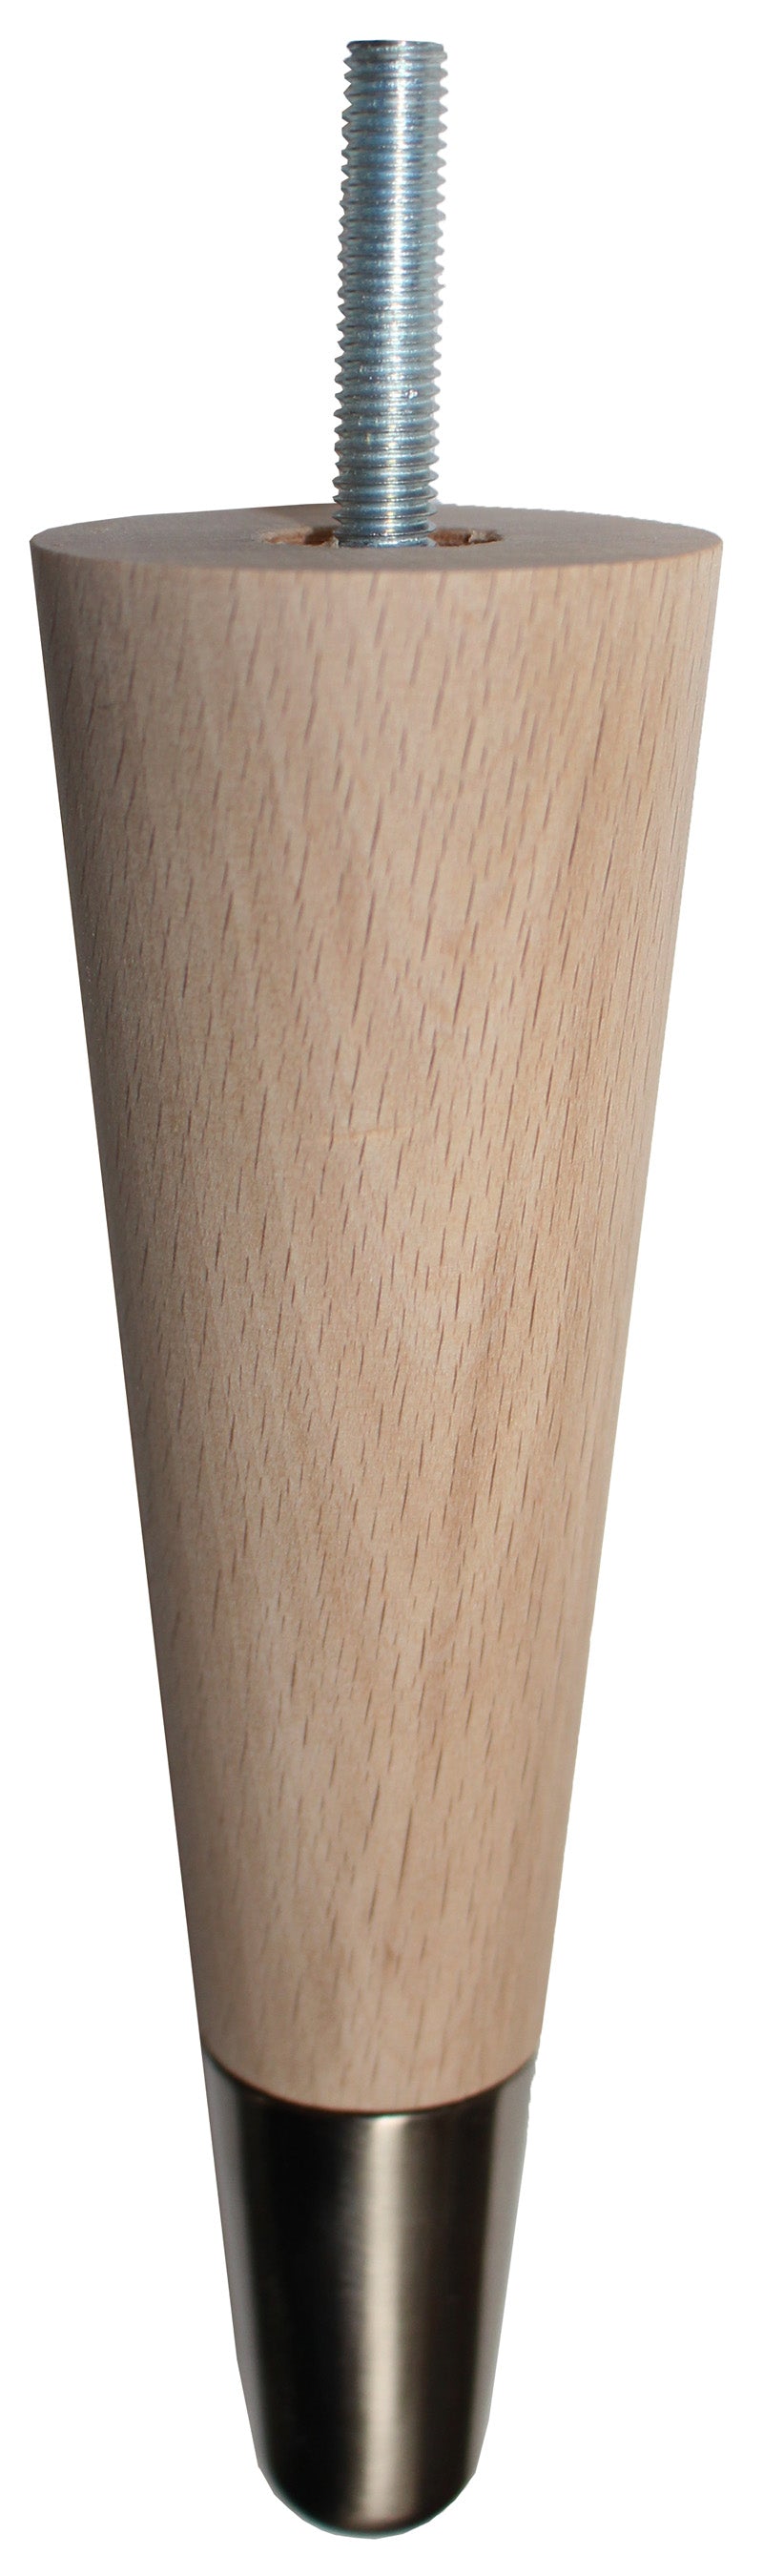 Sonia Solid Beech Tapered Furniture Legs - Raw Finish - Satin Slipper Cups - Set of 4